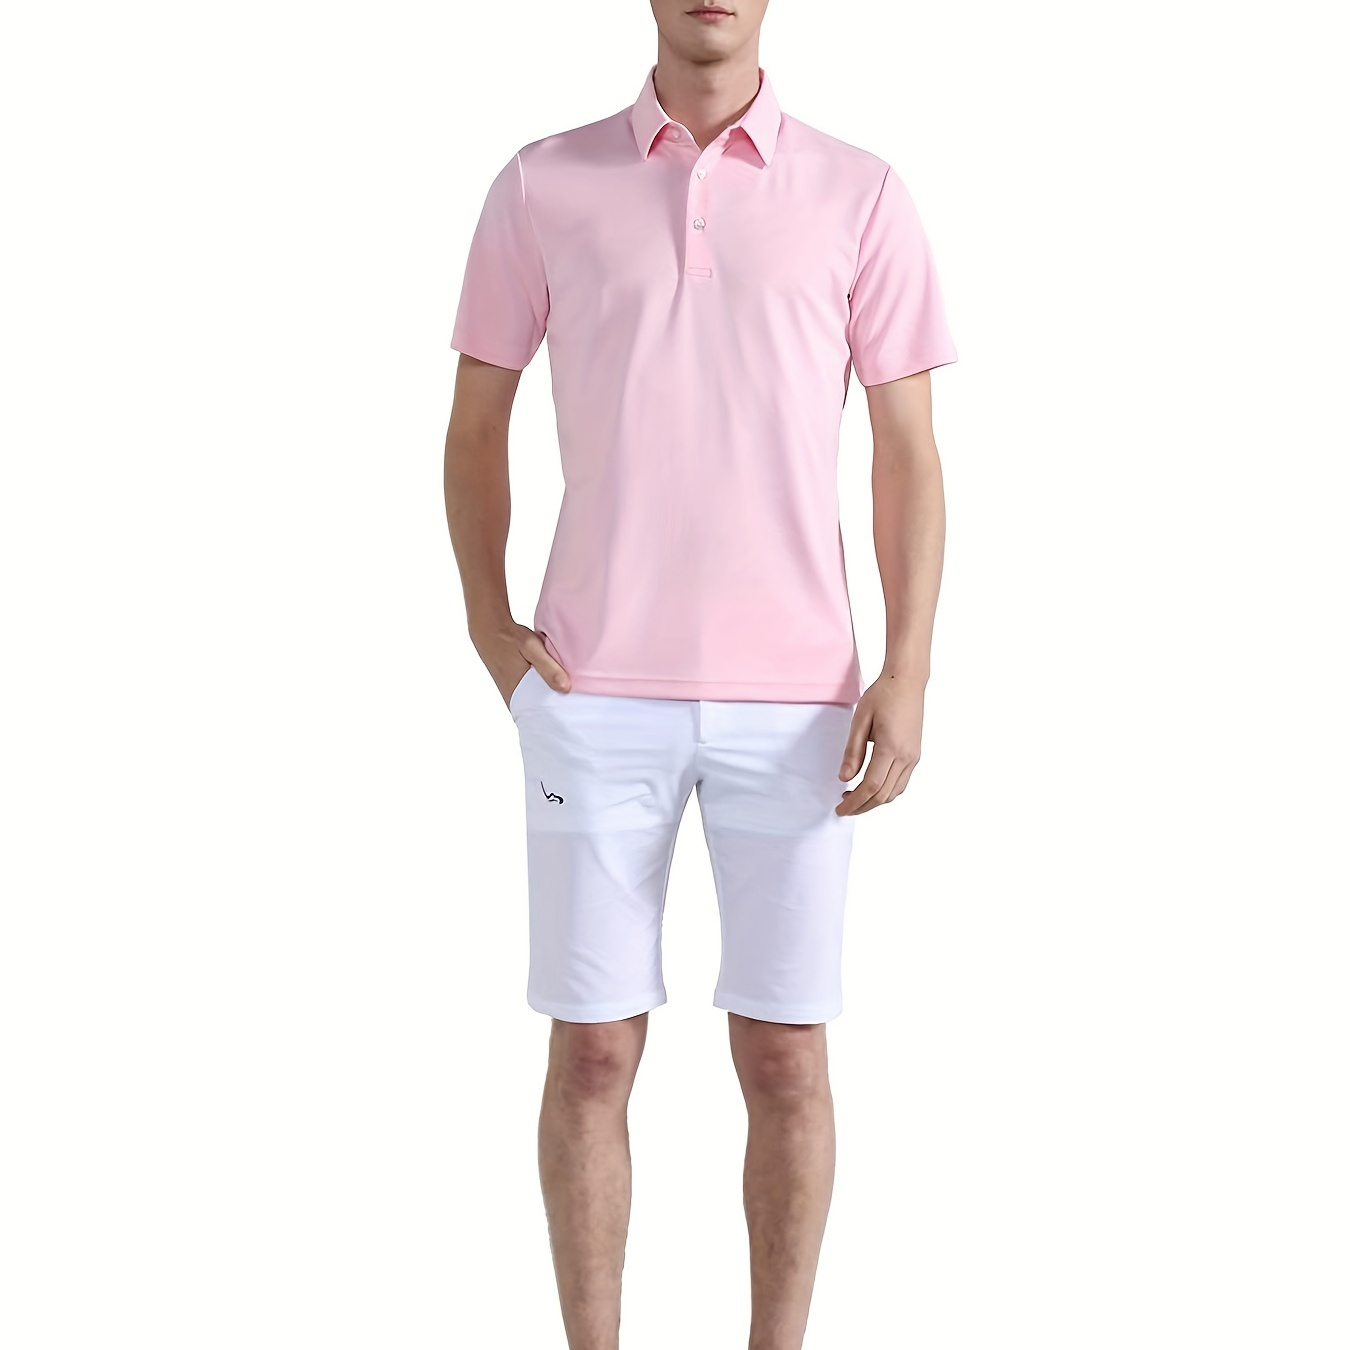 

Men's Plain Color Casual Turndown Collar Shirt, Male Short Sleeve Top, Sports Leisure Soft Adult Tennis Clothing For Outdoor